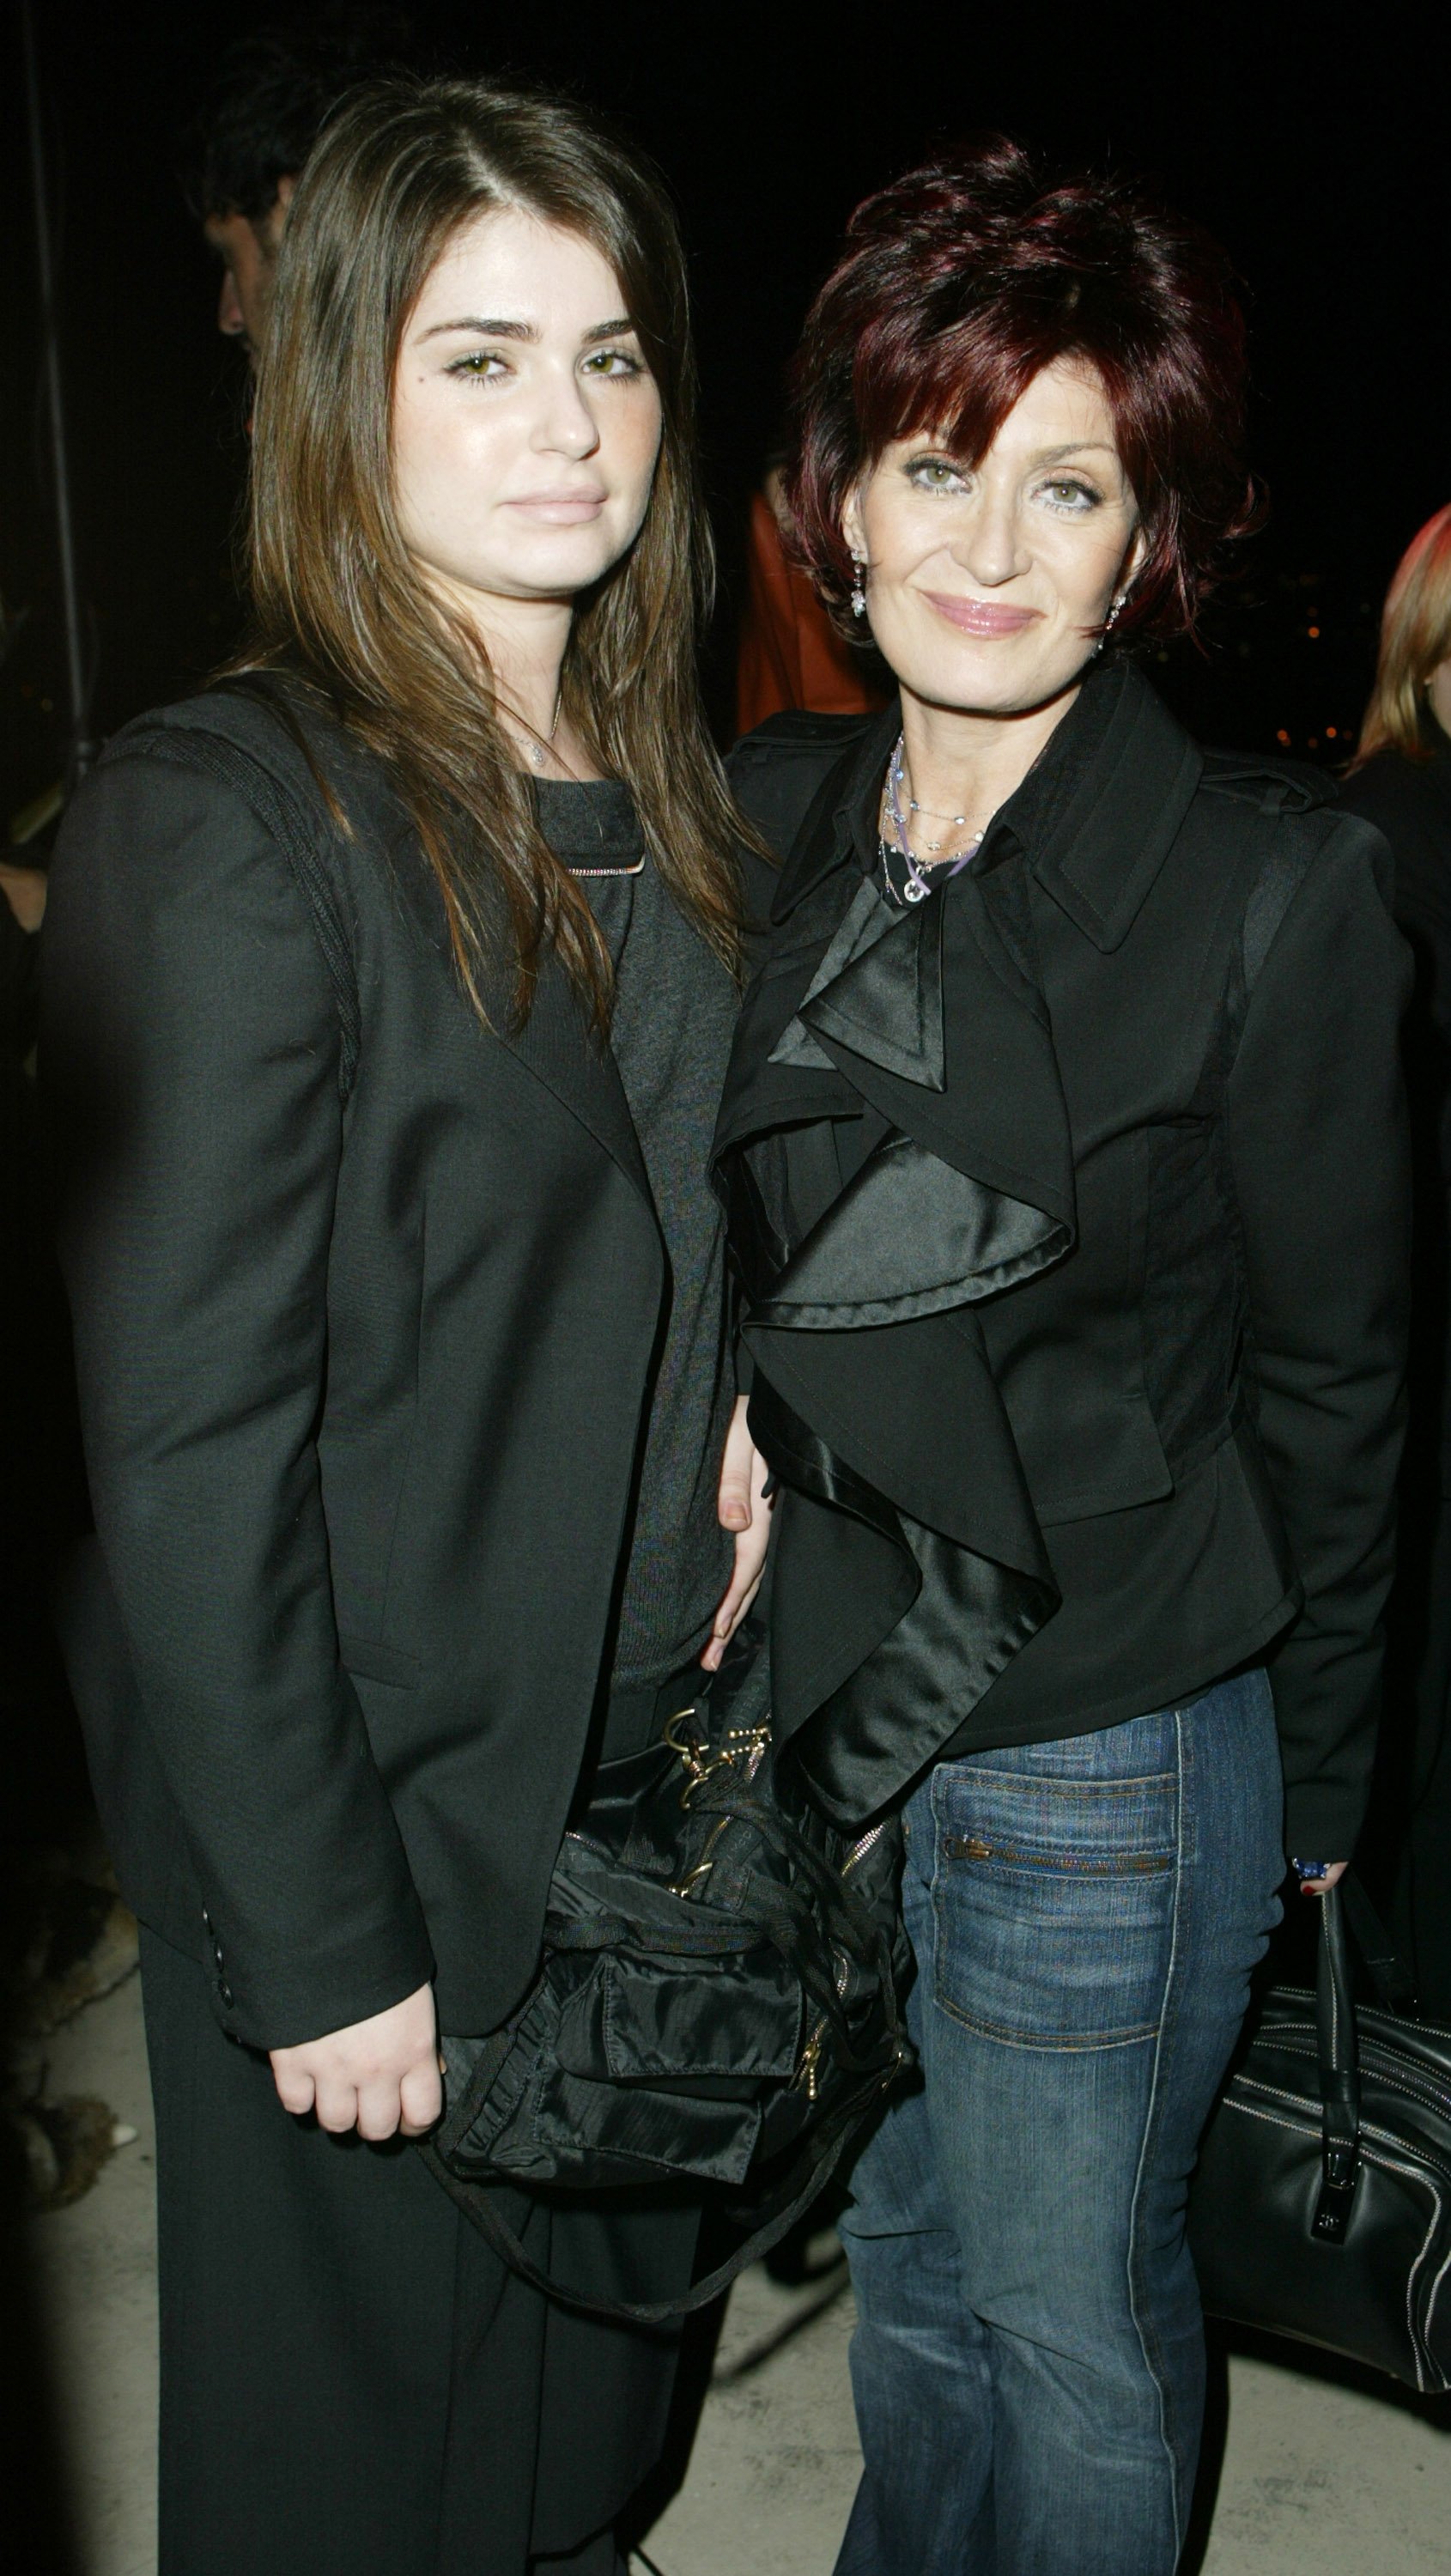 Singer Aimee Osbourne with her mother TV personality Sharon Osbourne during "The Heart is Deceitful Above All Things" Wrap Party at Chateau Marmont in Los Angeles, California. / Source: Getty Images